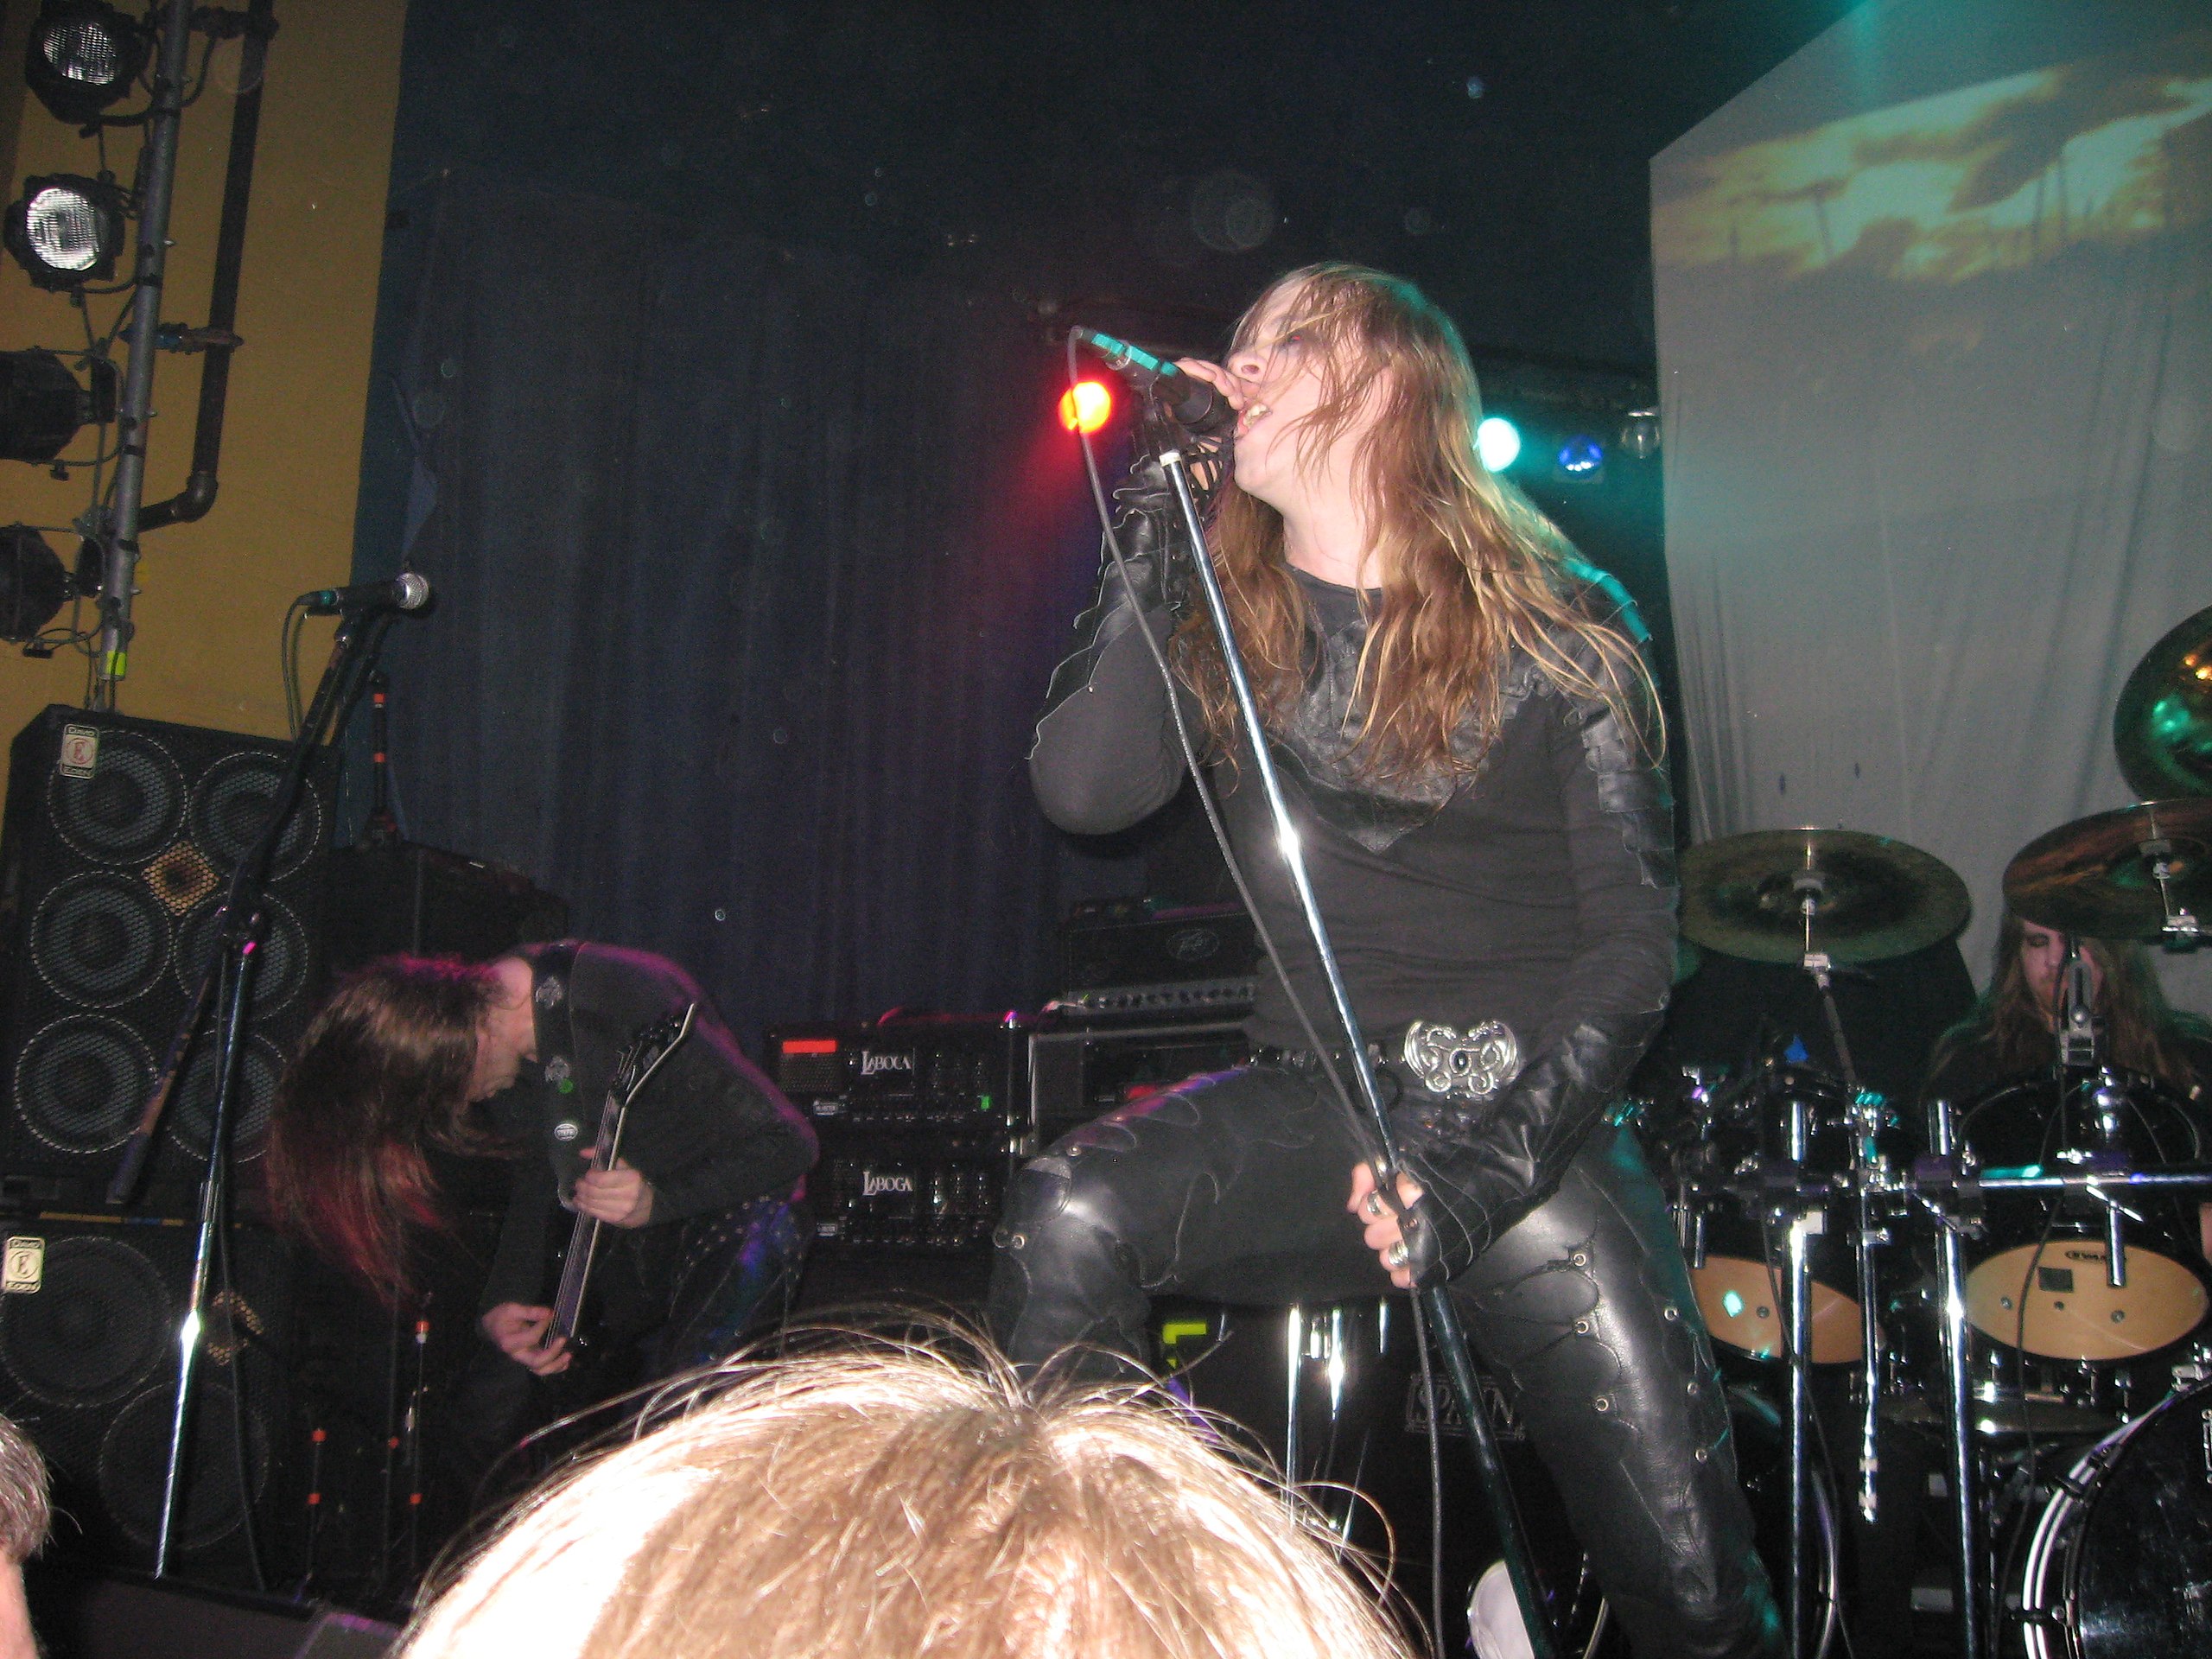 File:Keep of Kalessin Live in Pittsburgh, PA.jpg - Wikimedia Commons